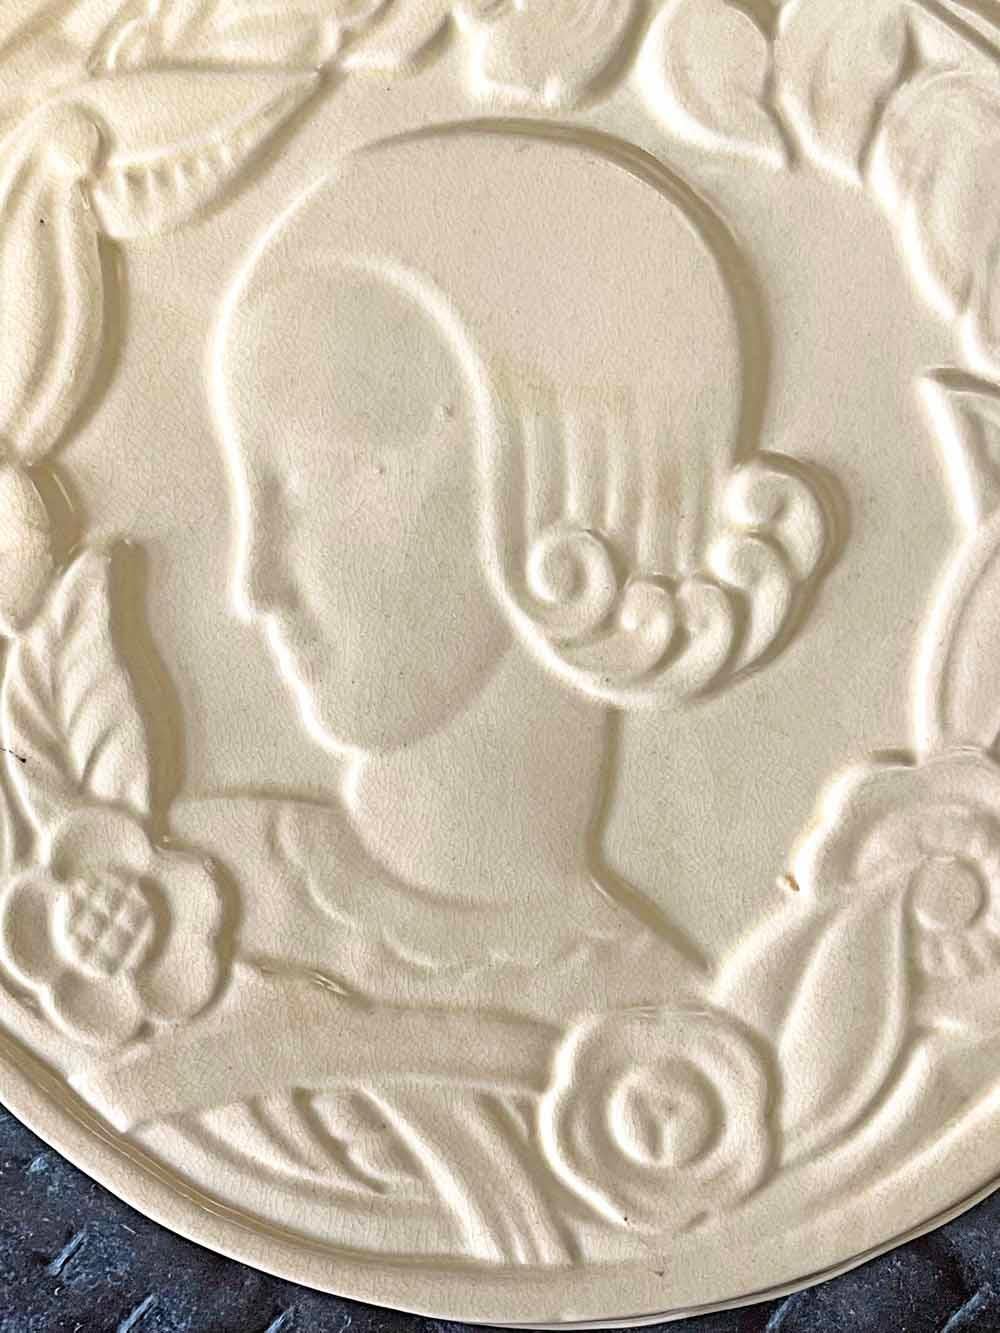 Beautifully enrobed in a pale, ivory-toned glaze, this rare, high style Art Deco trivet depicts a fashionable female figure in profile, her hair curled in repeating waves like the lapping water of an seaside beach.  The woman is surrounded by a